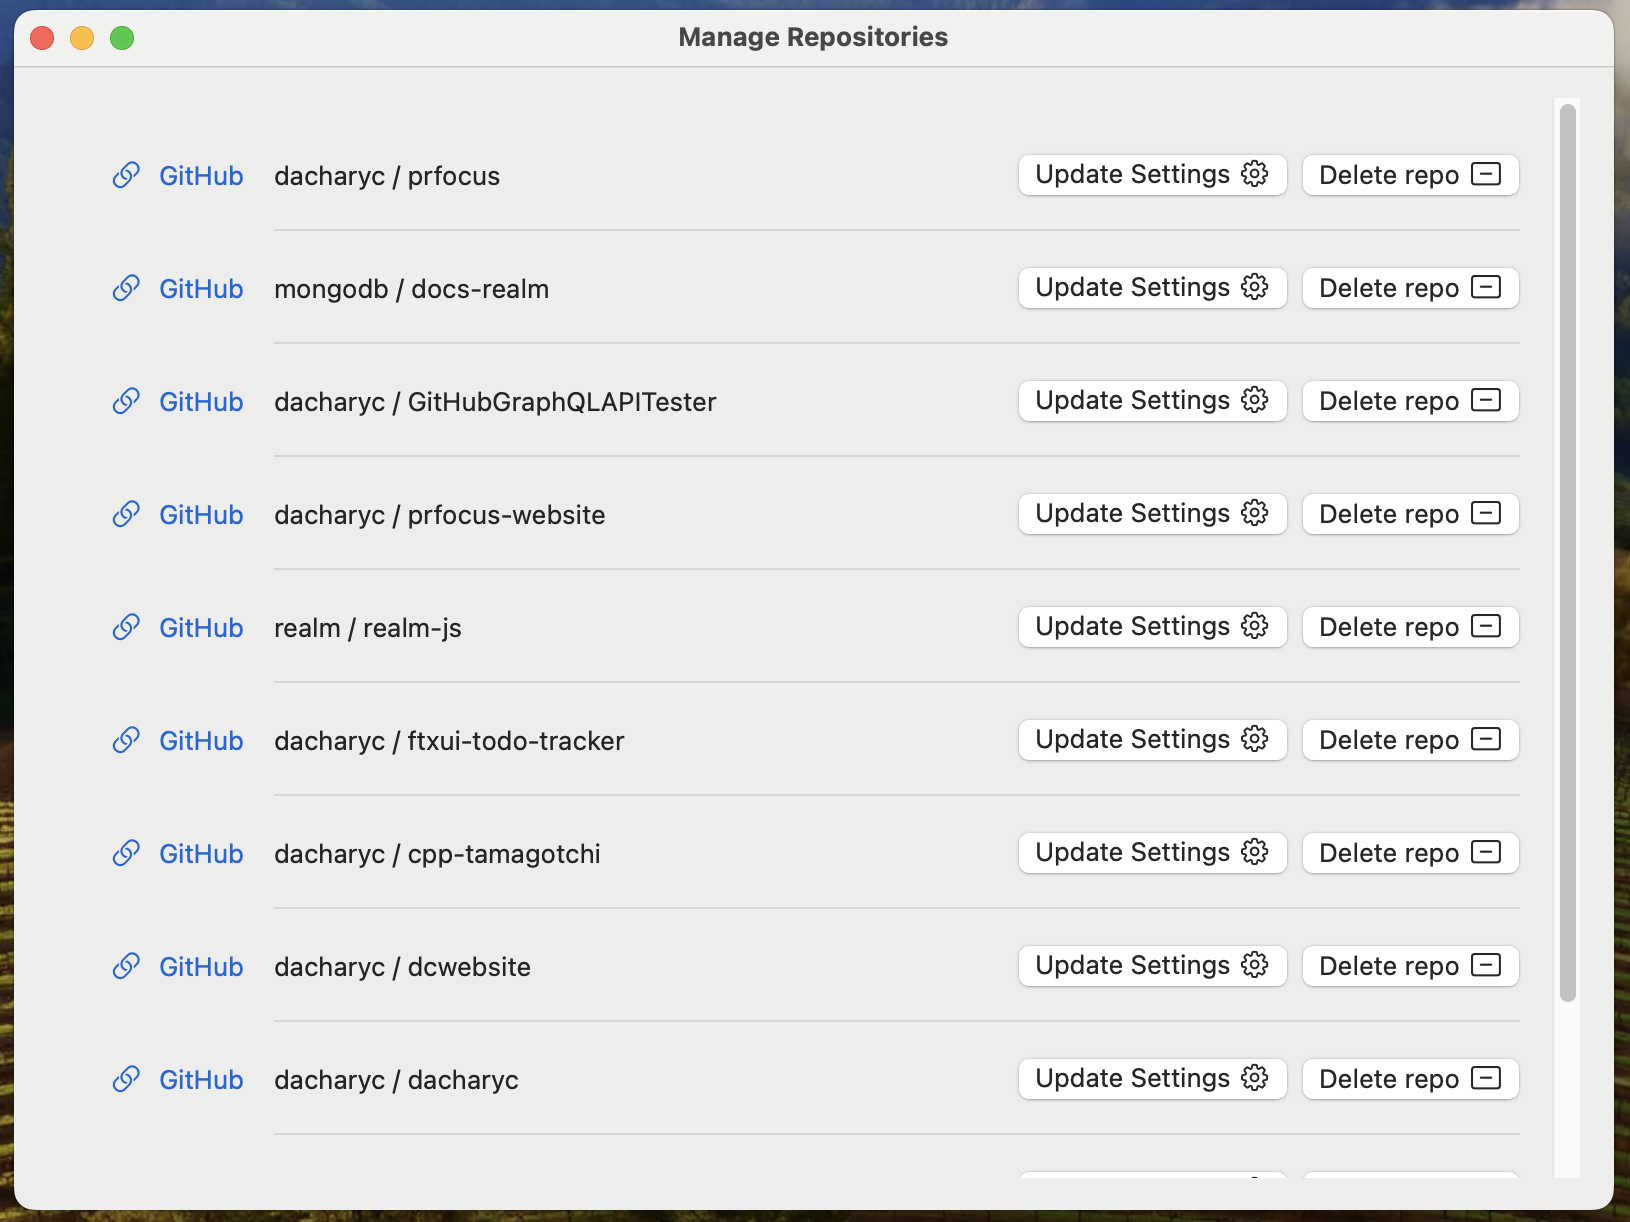 Screenshot showing the Manage Repositories window with links to view repositories on GitHub, and buttons to update settings or delete the repositories